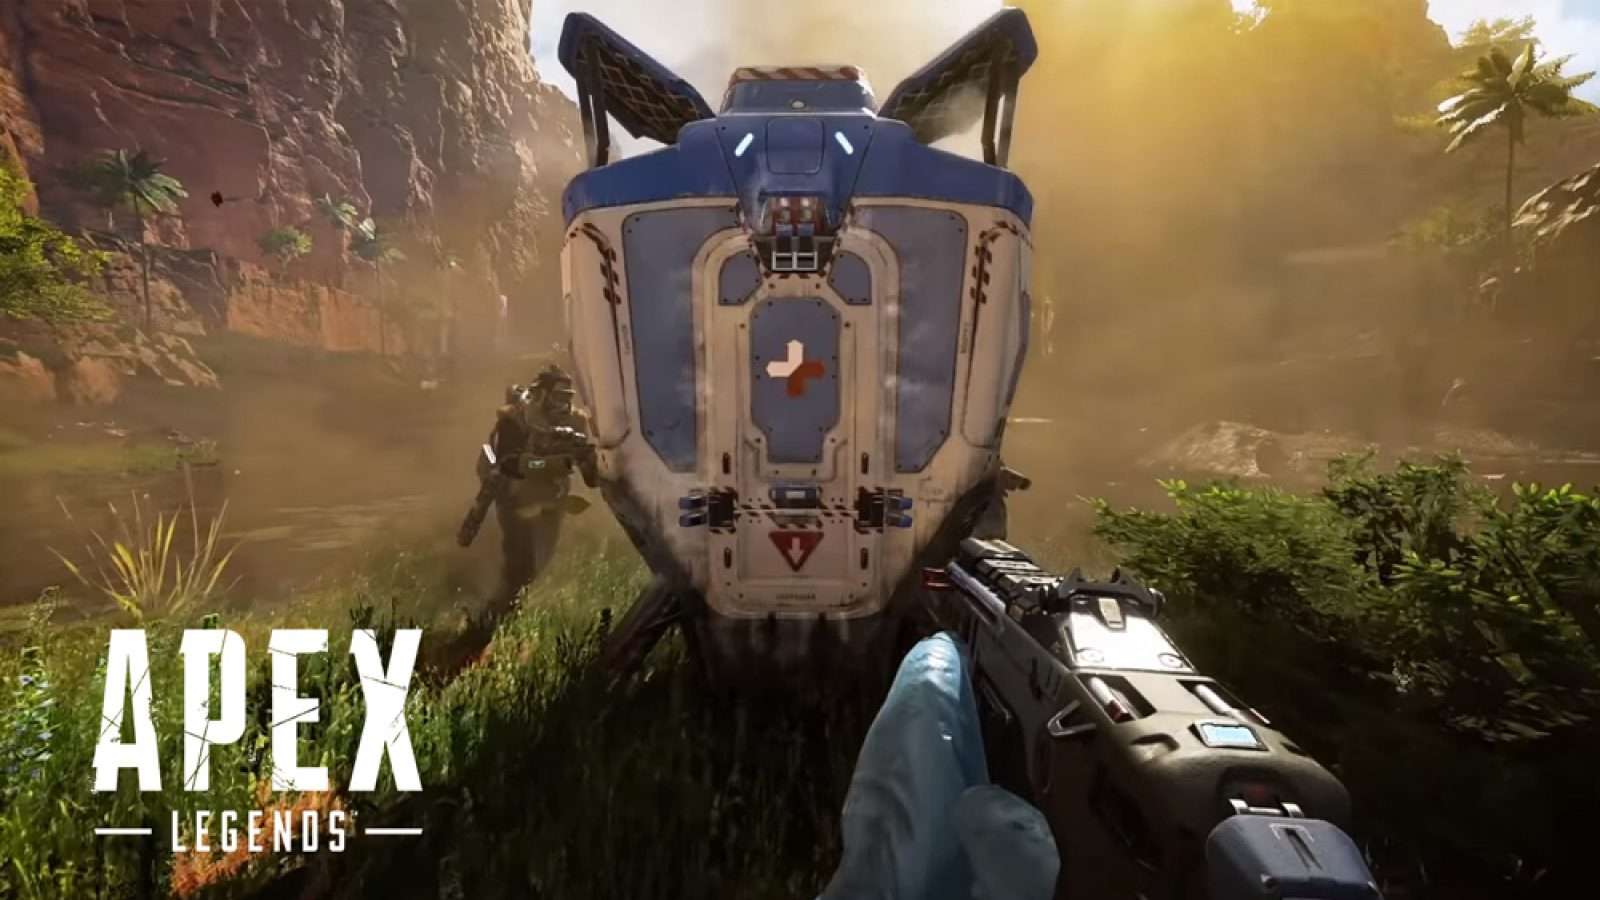 Lifeline's Apex Legends Care Package with logo